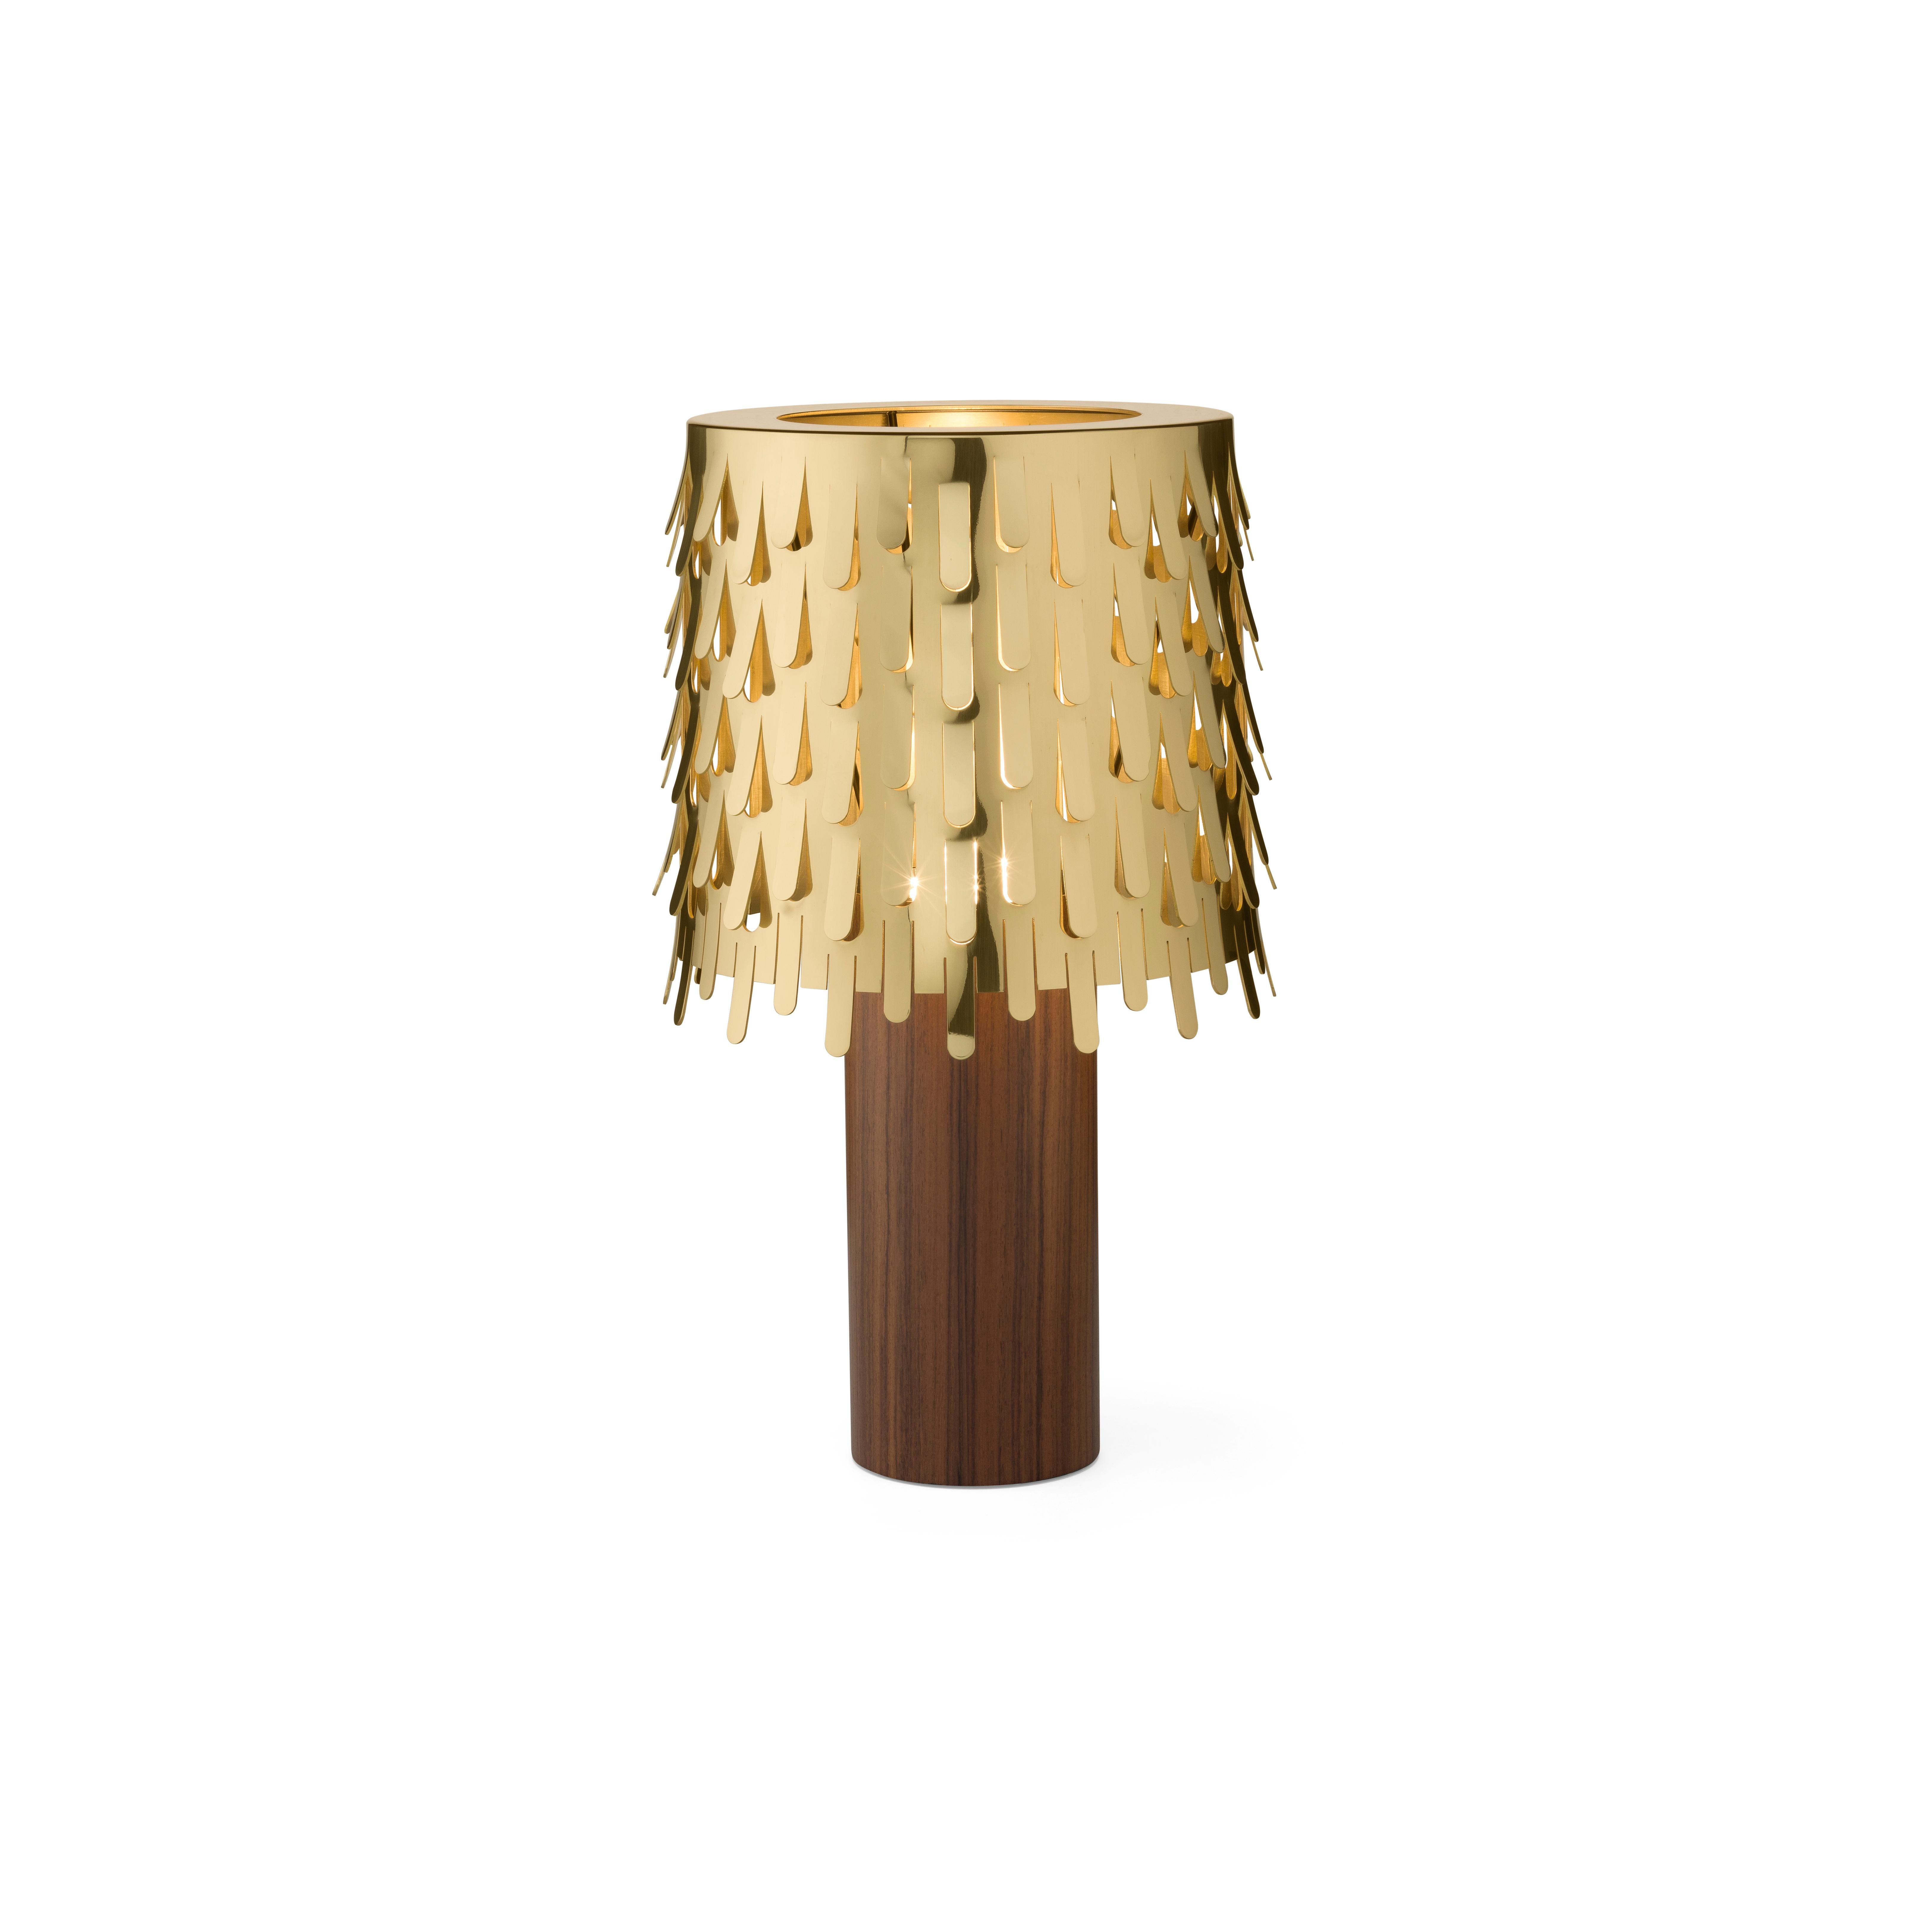 Jackfruit table lamp by campana brothers. The lamp is made of polished brass, synonymous of elegance and preciousness. It is composed of two overlapping cylinders, the large stem supports an important lampshade decorated with a thousand leaves bent